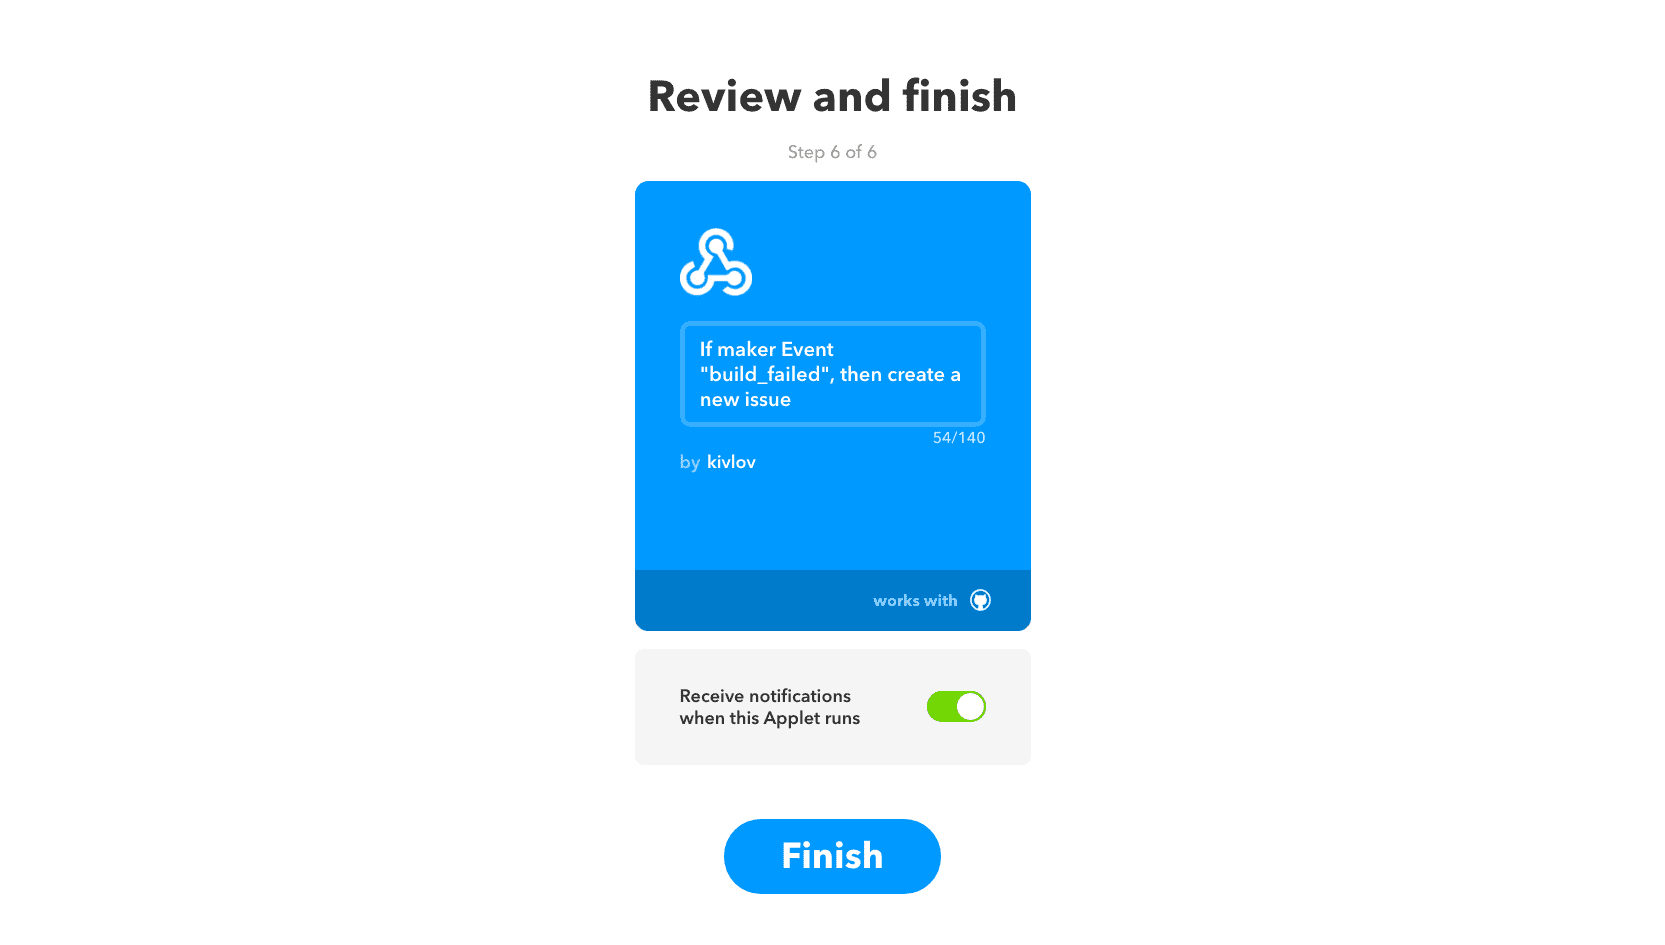 Final review